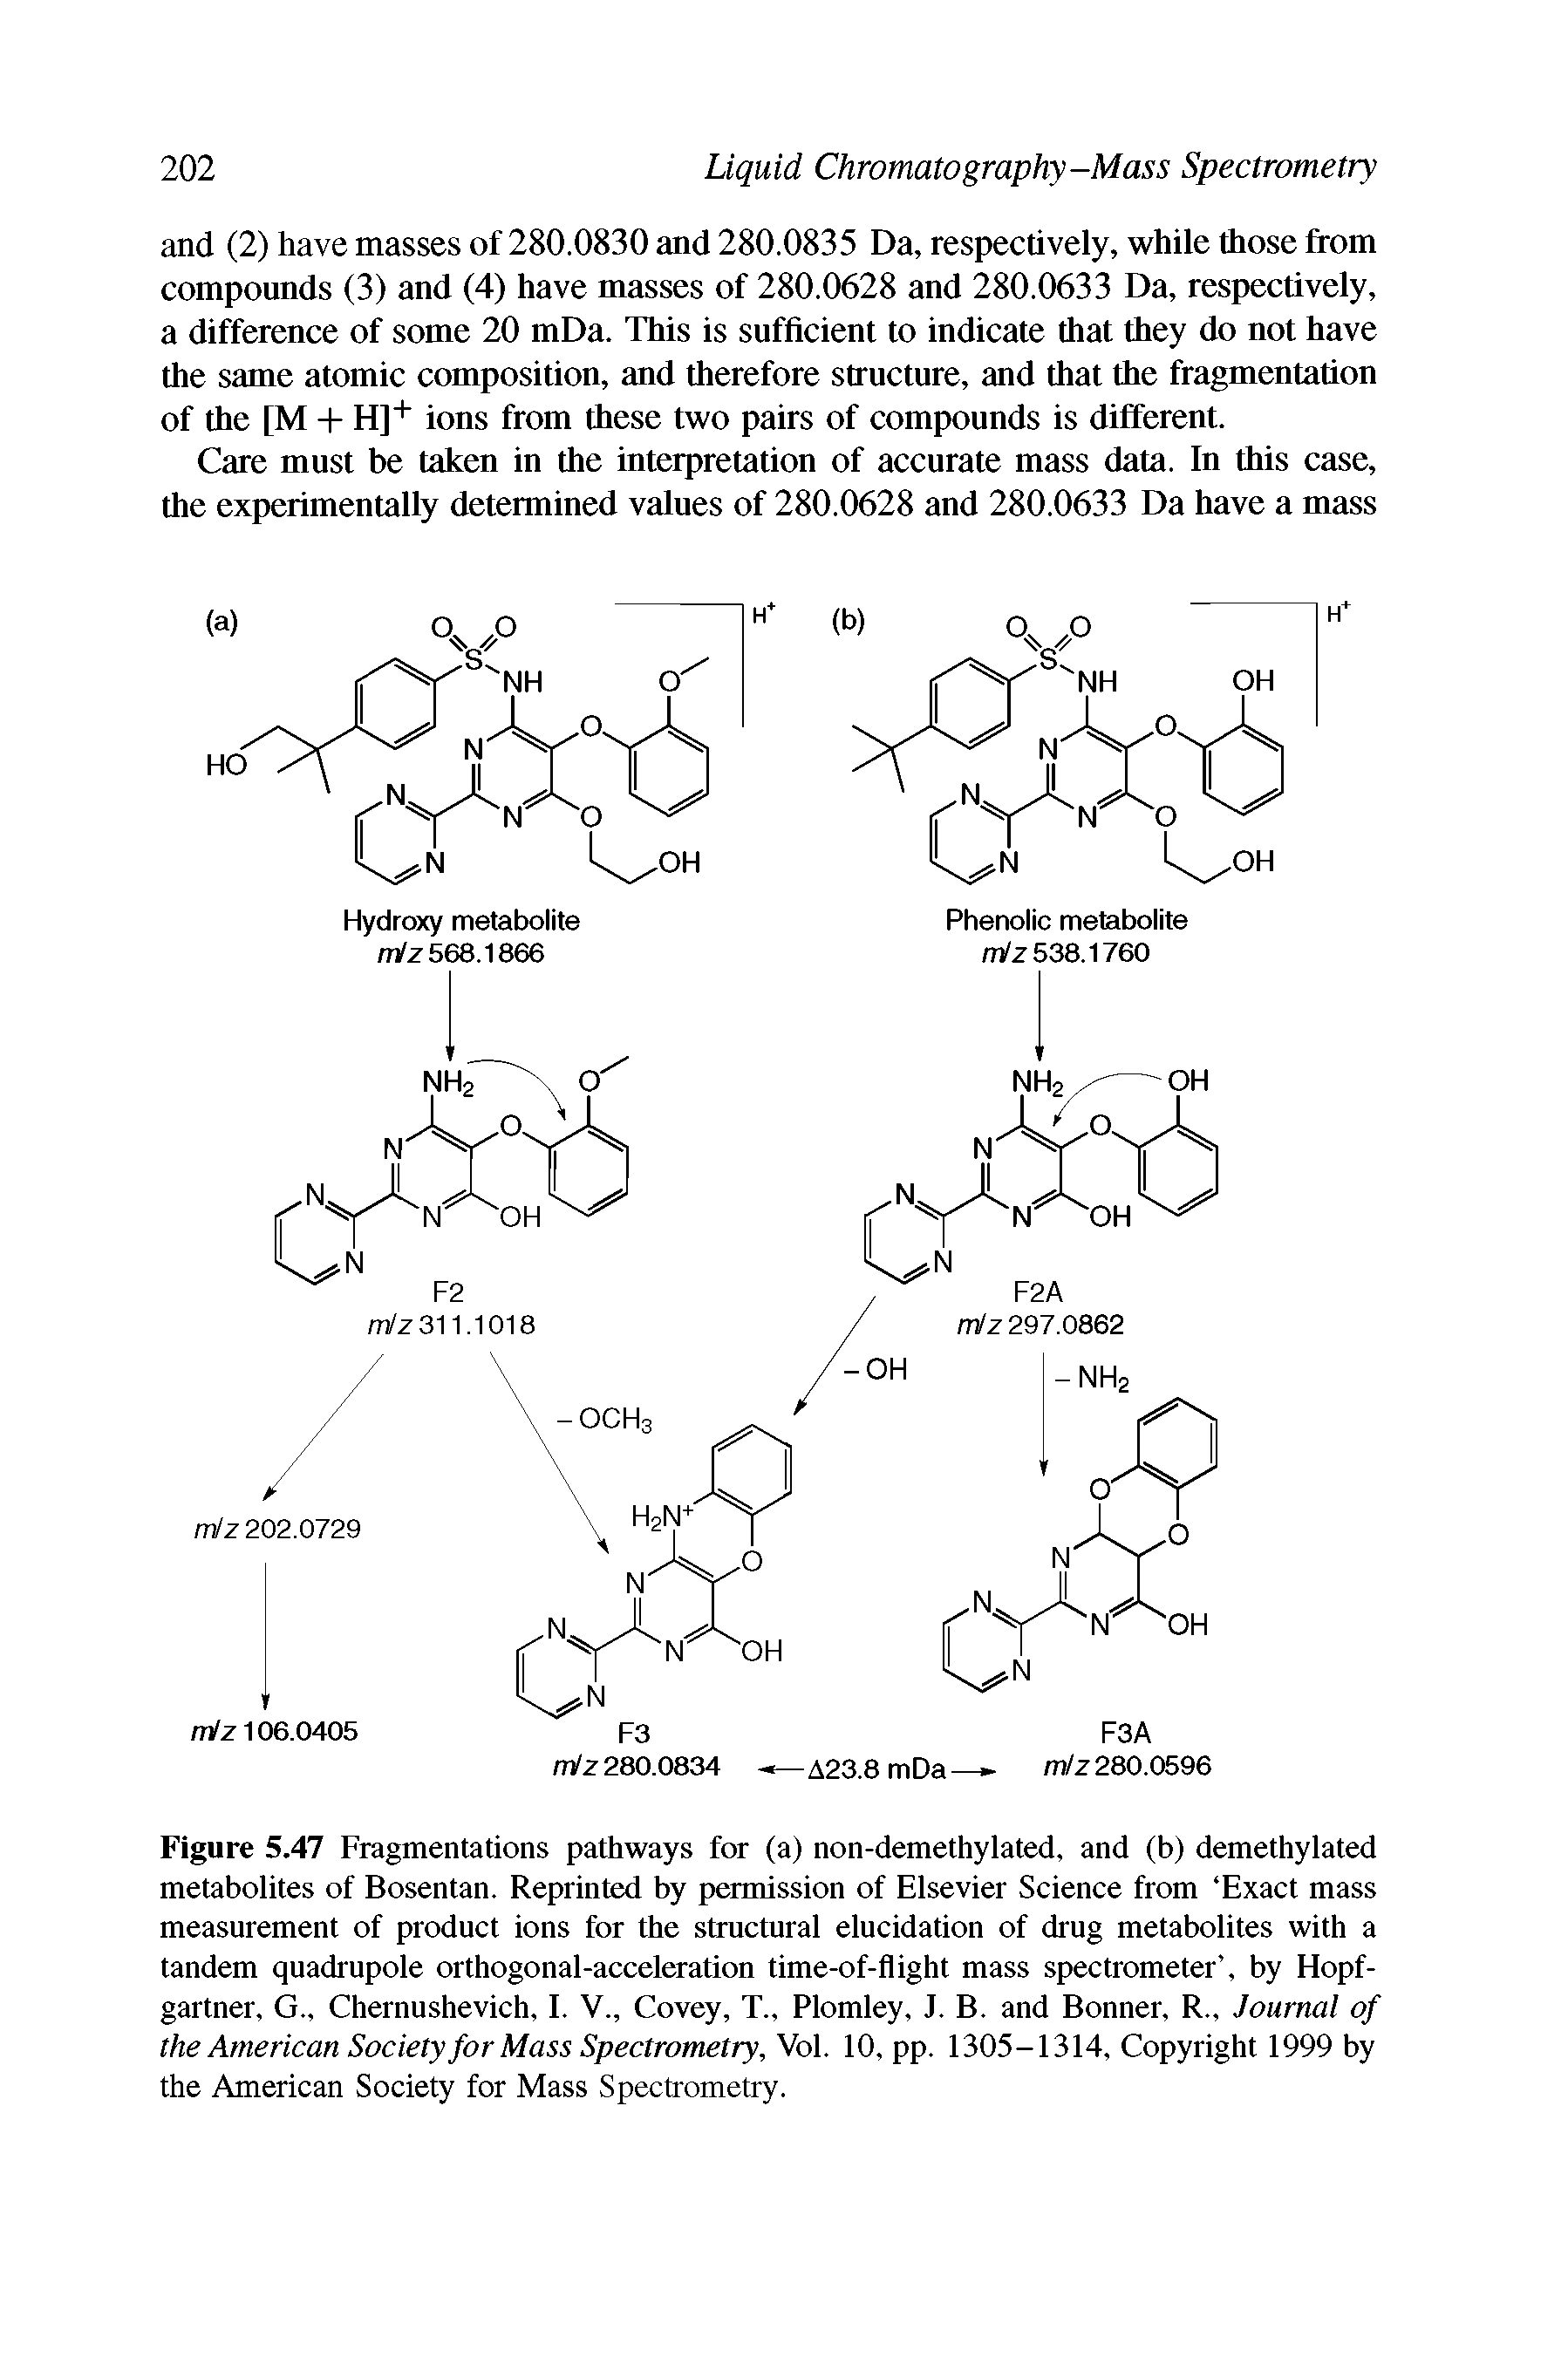 Figure 5.47 Fragmentations pathways for (a) non-demethylated, and (b) demethylated metabolites of Bosentan. Reprinted by permission of Elsevier Science from Exact mass measurement of product ions for the structural elucidation of drug metabolites with a tandem quadrupole orthogonal-acceleration time-of-flight mass spectrometer , by Hopf-gartner, G., Chernushevich, I. V., Covey, T., Plomley, J. B. and Bonner, R., Journal of the American Society for Mass Spectrometry, Vol. 10, pp. 1305-1314, Copyright 1999 by the American Society for Mass Spectrometry.